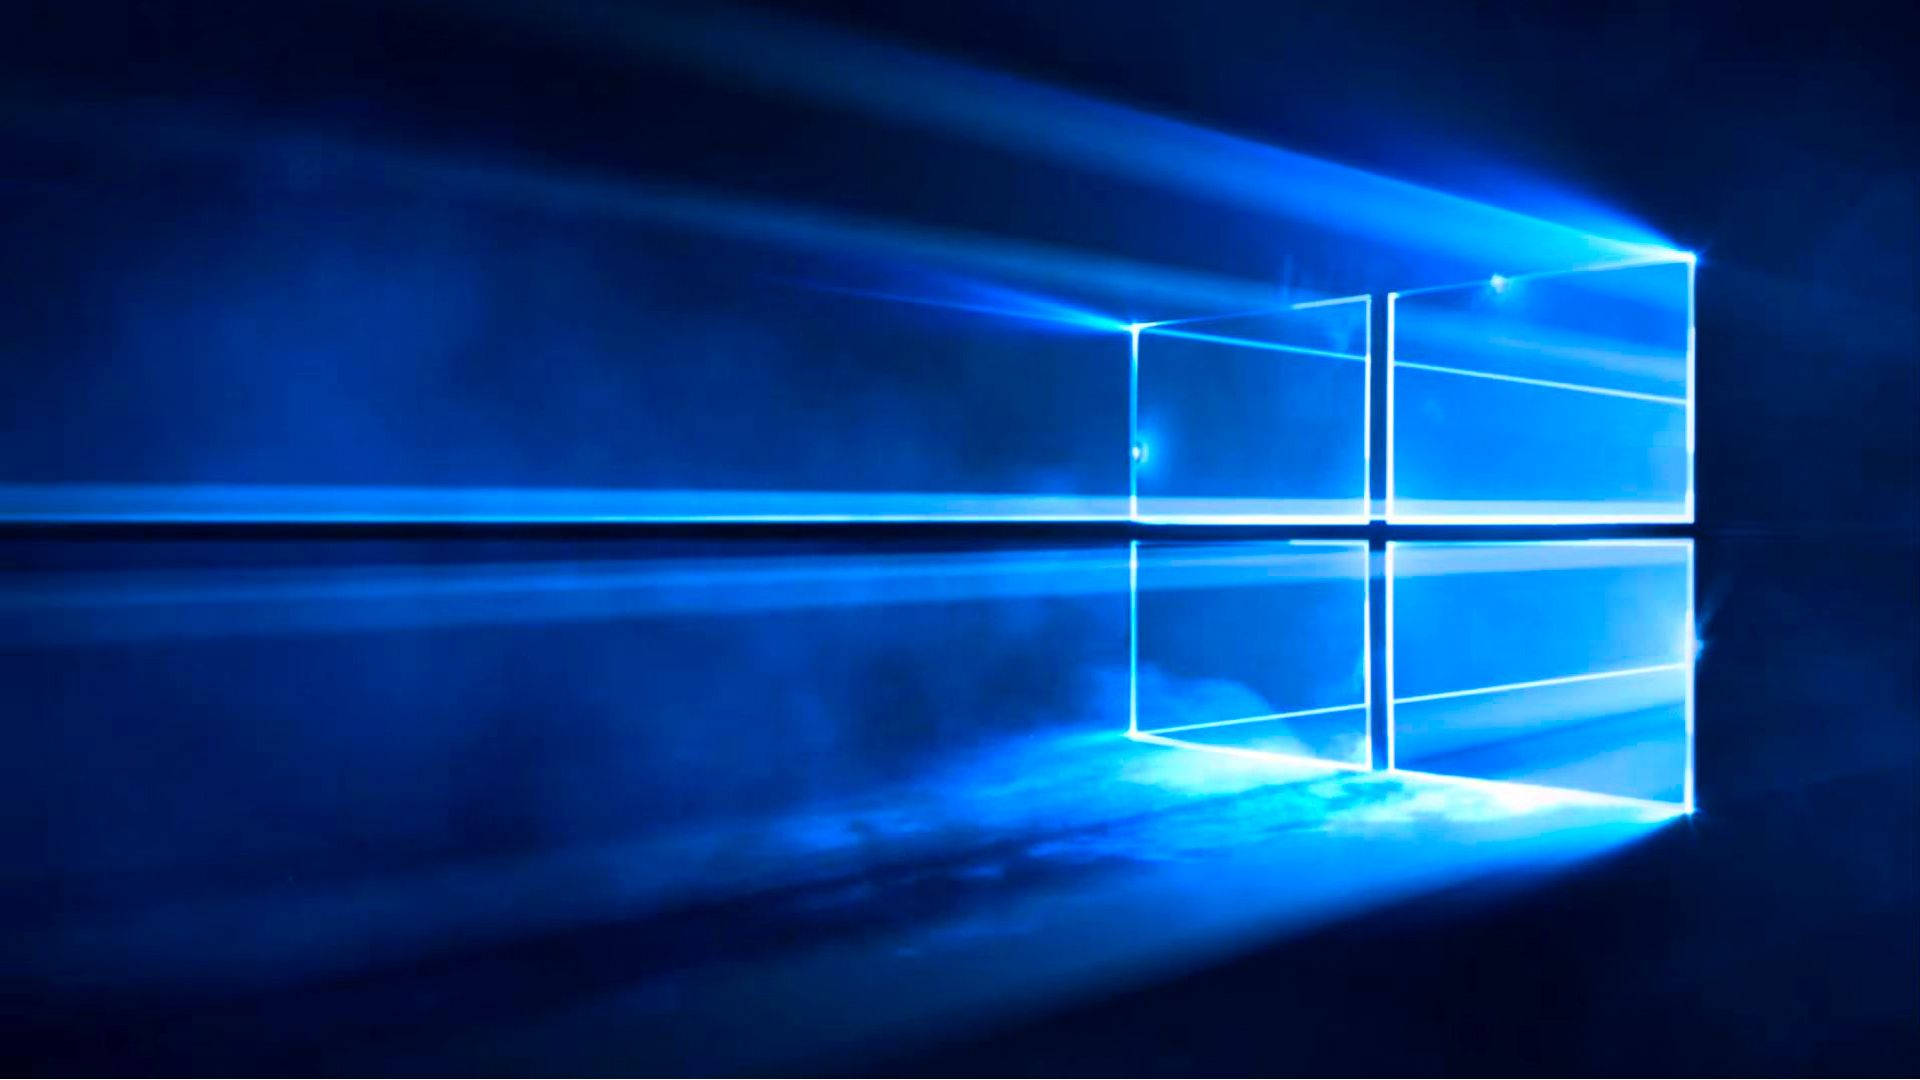 Welcome to the World of Windows 10 Wallpaper